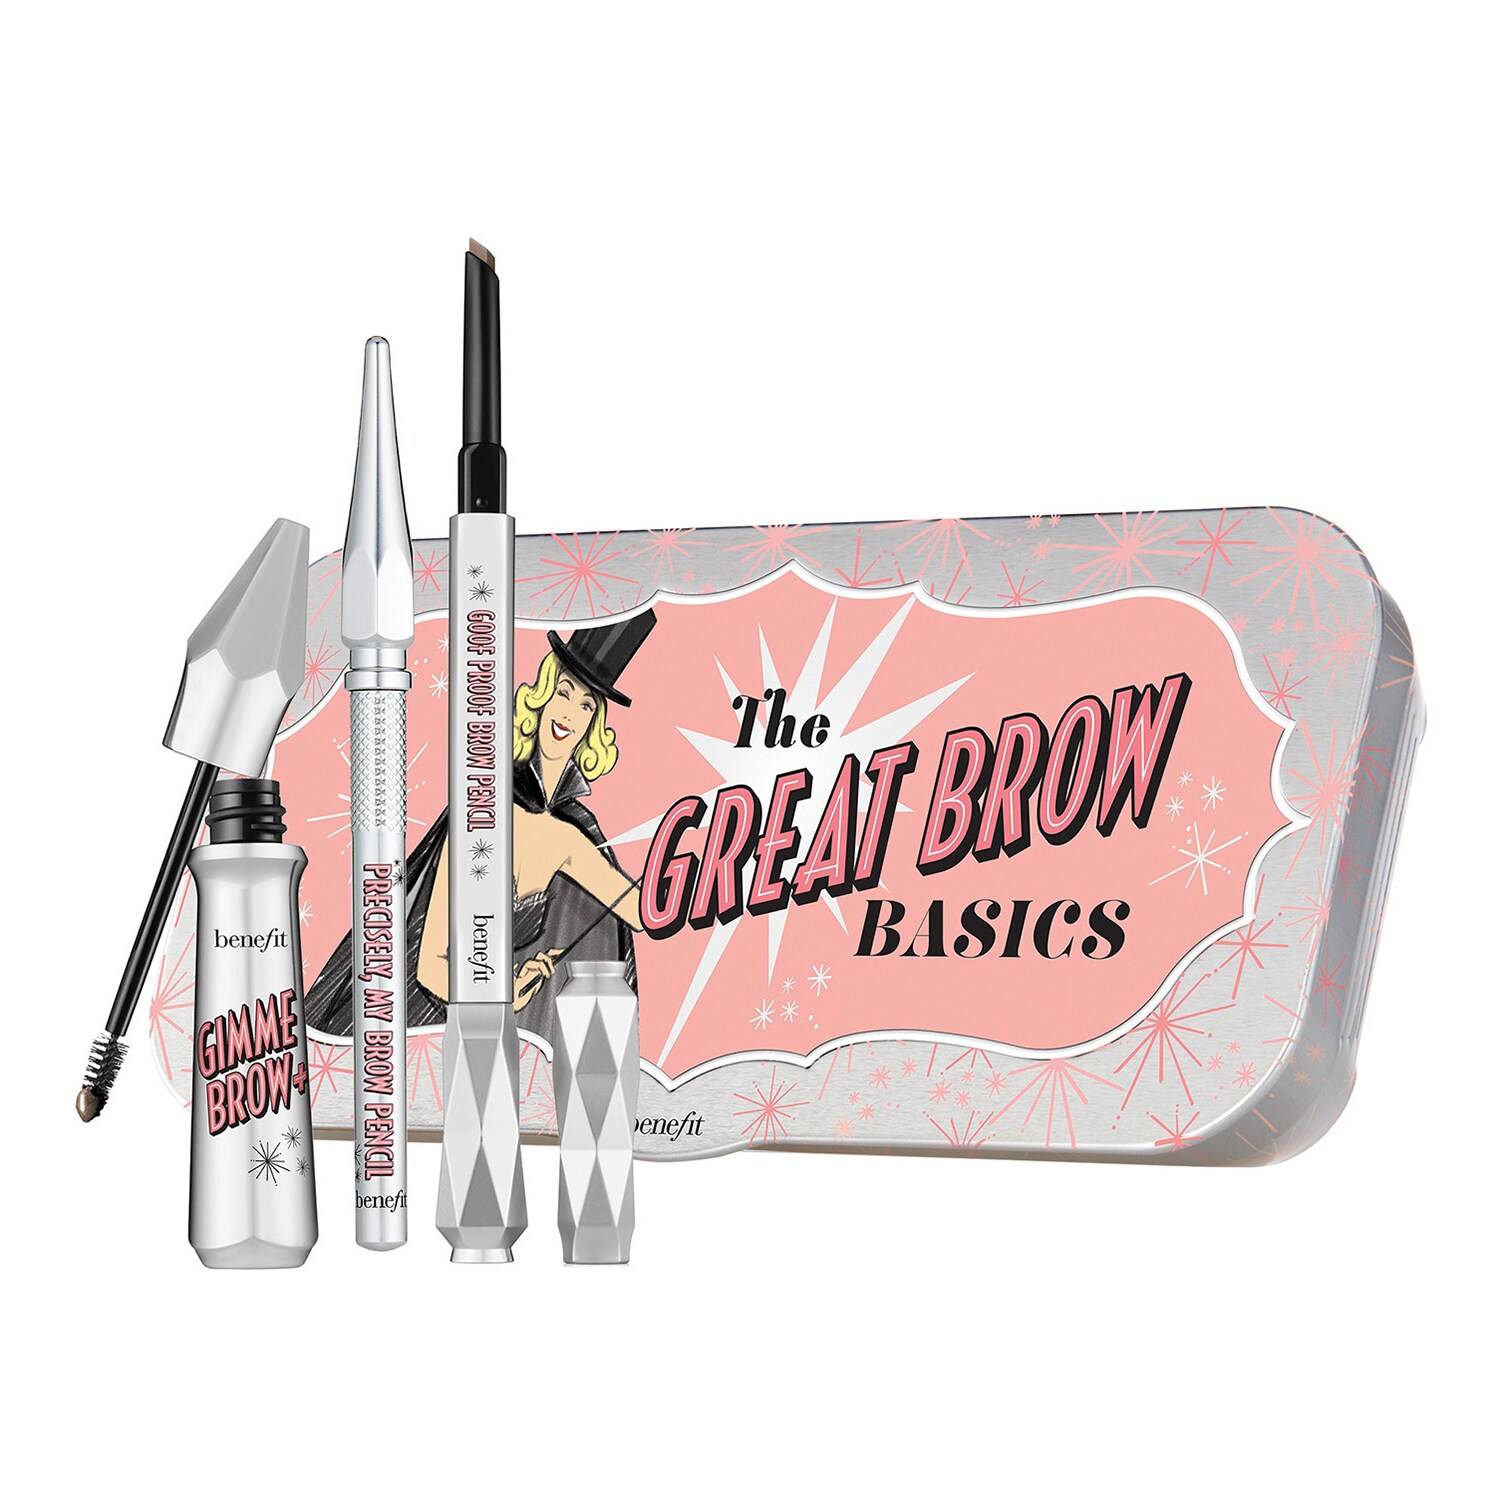 Benefit The Great Brow Basics Brow Gel & Pencils Collection 3.4G 3